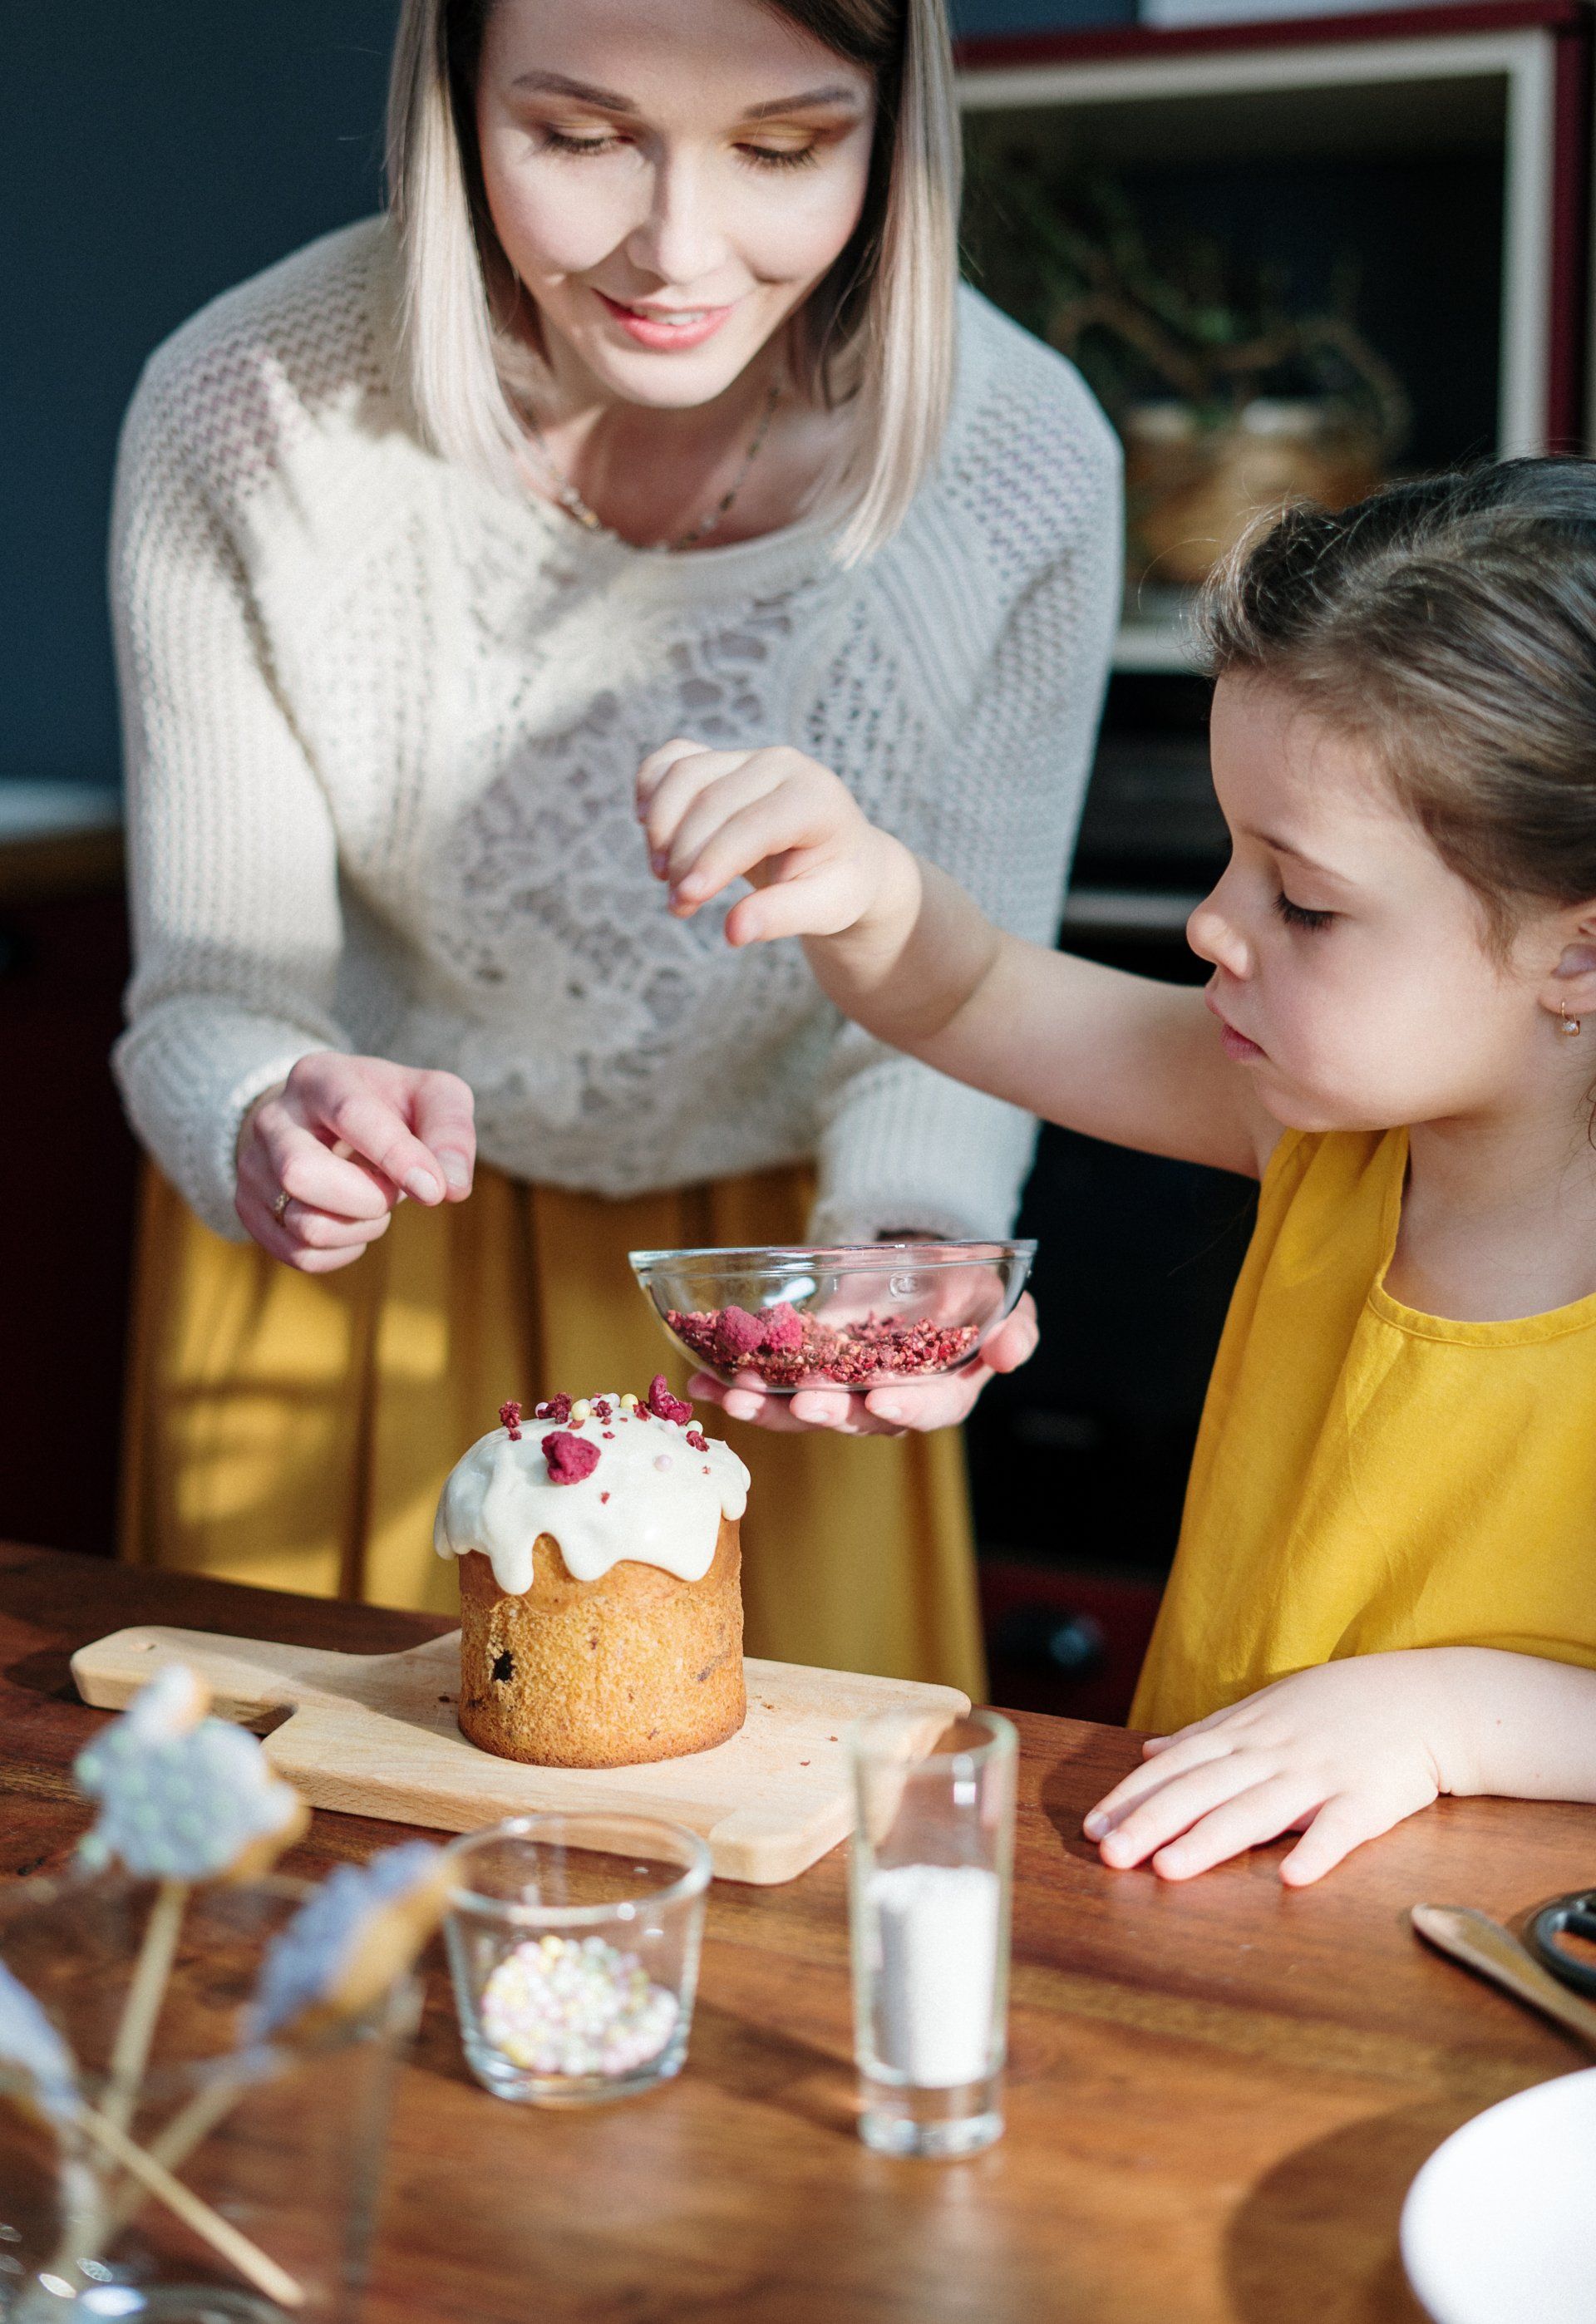 A woman and a little girl are sitting at a table decorating a cake.